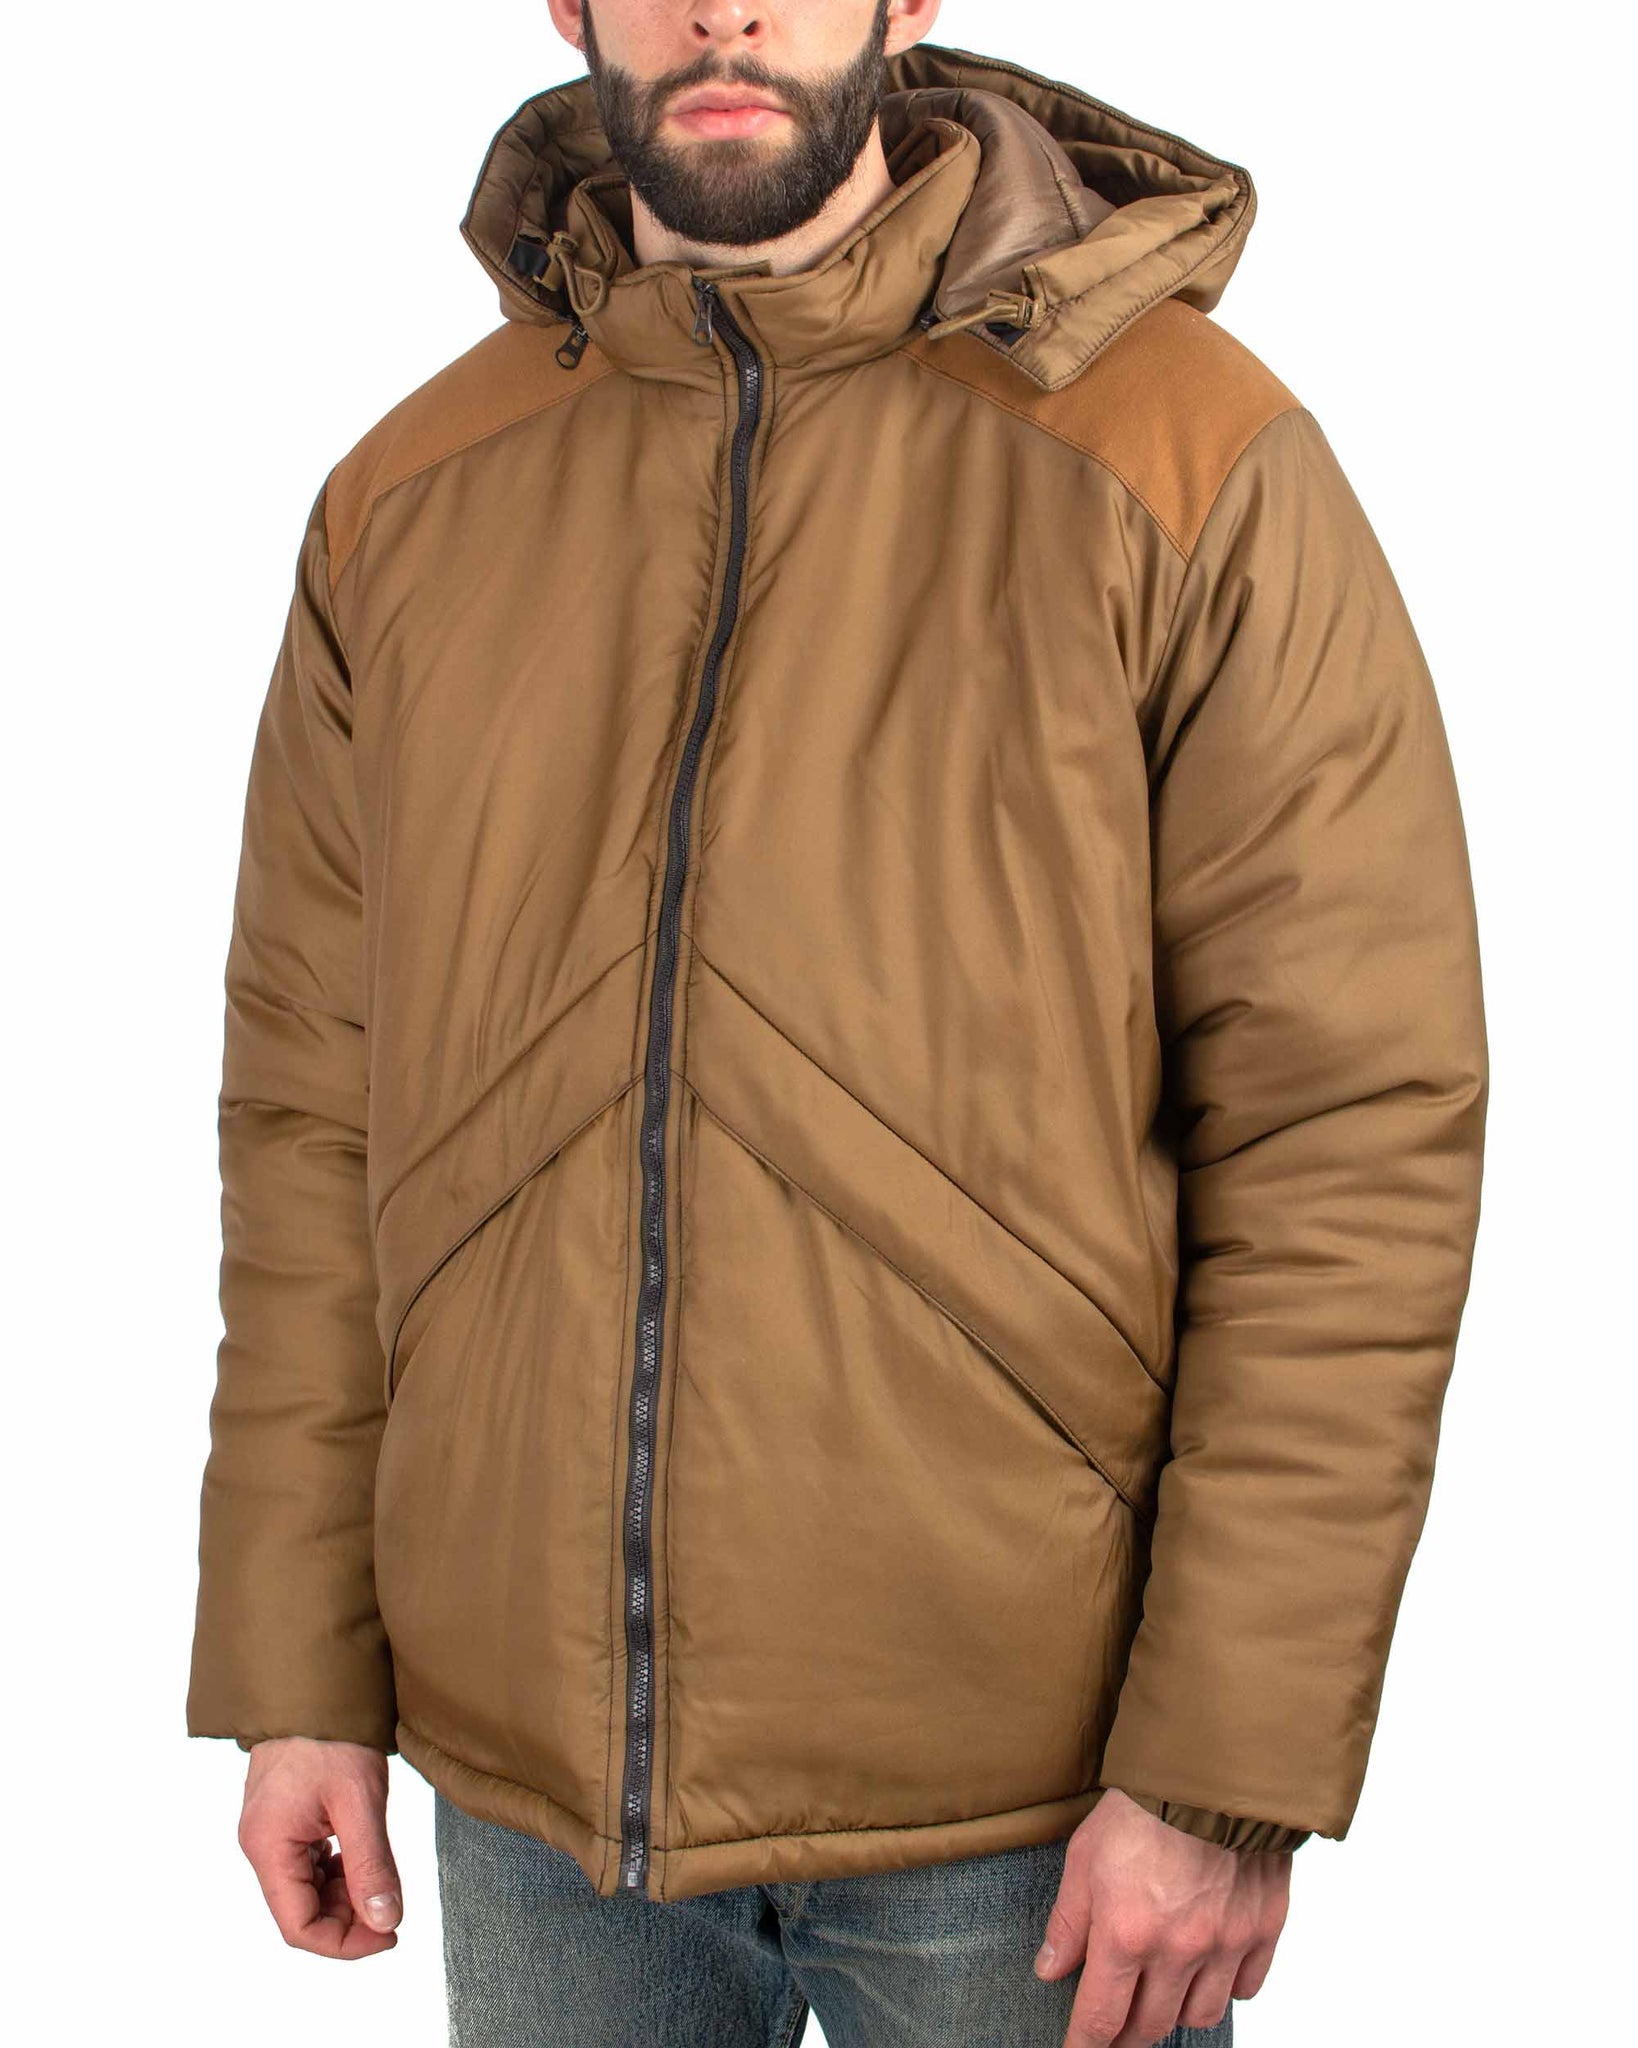 The Real McCoy's MJ21130 Parka, Extreme Cold Weather (Gen I) Coyote Close